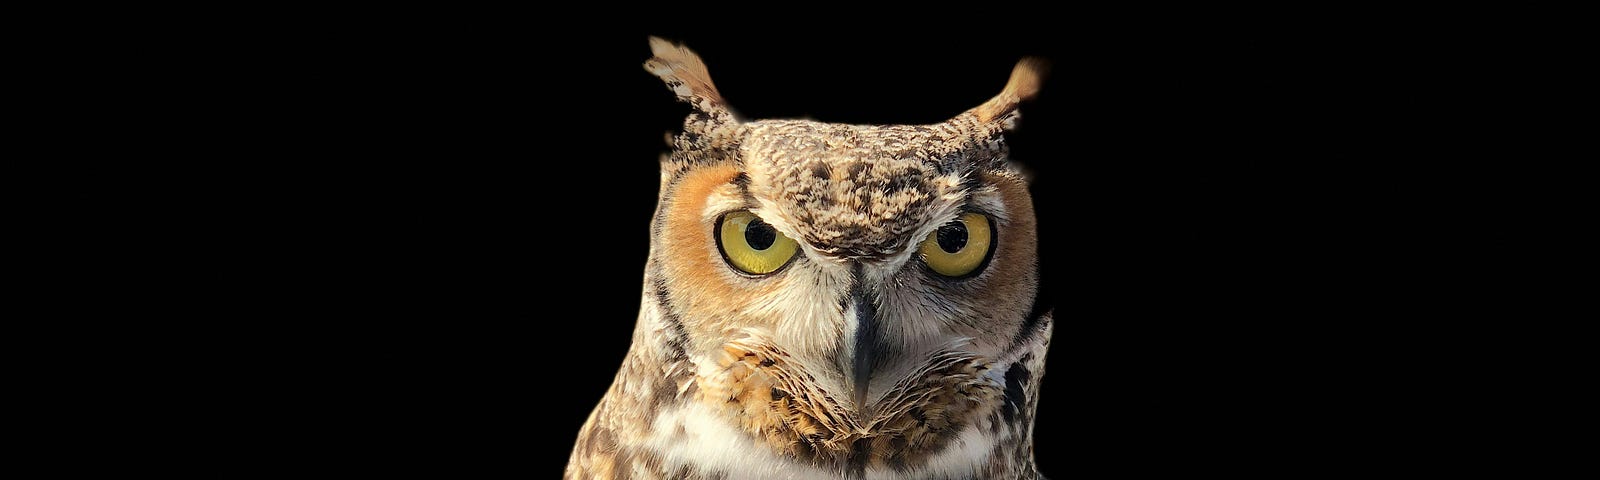 An Owl with a black background in the photo.